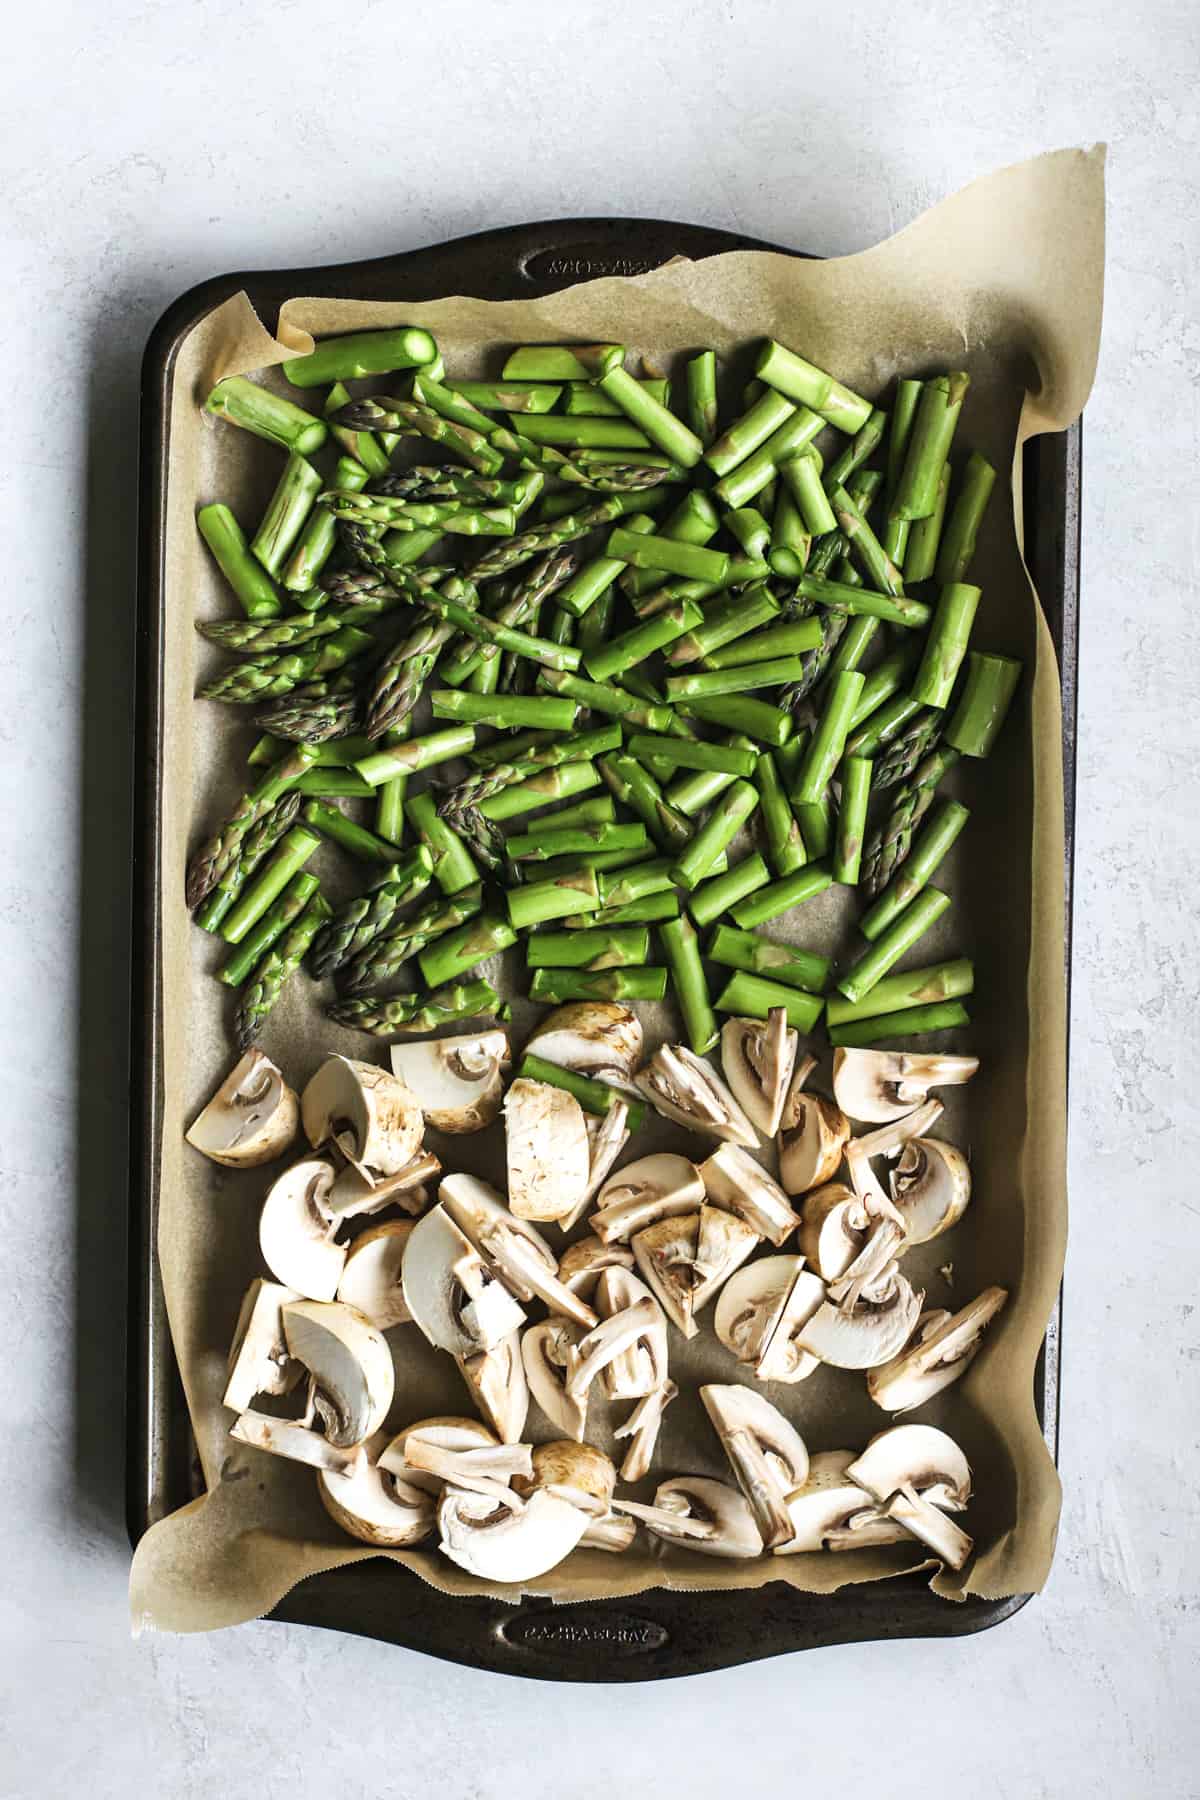 Chopped mushrooms and asparagus on parchment-lined sheet pan